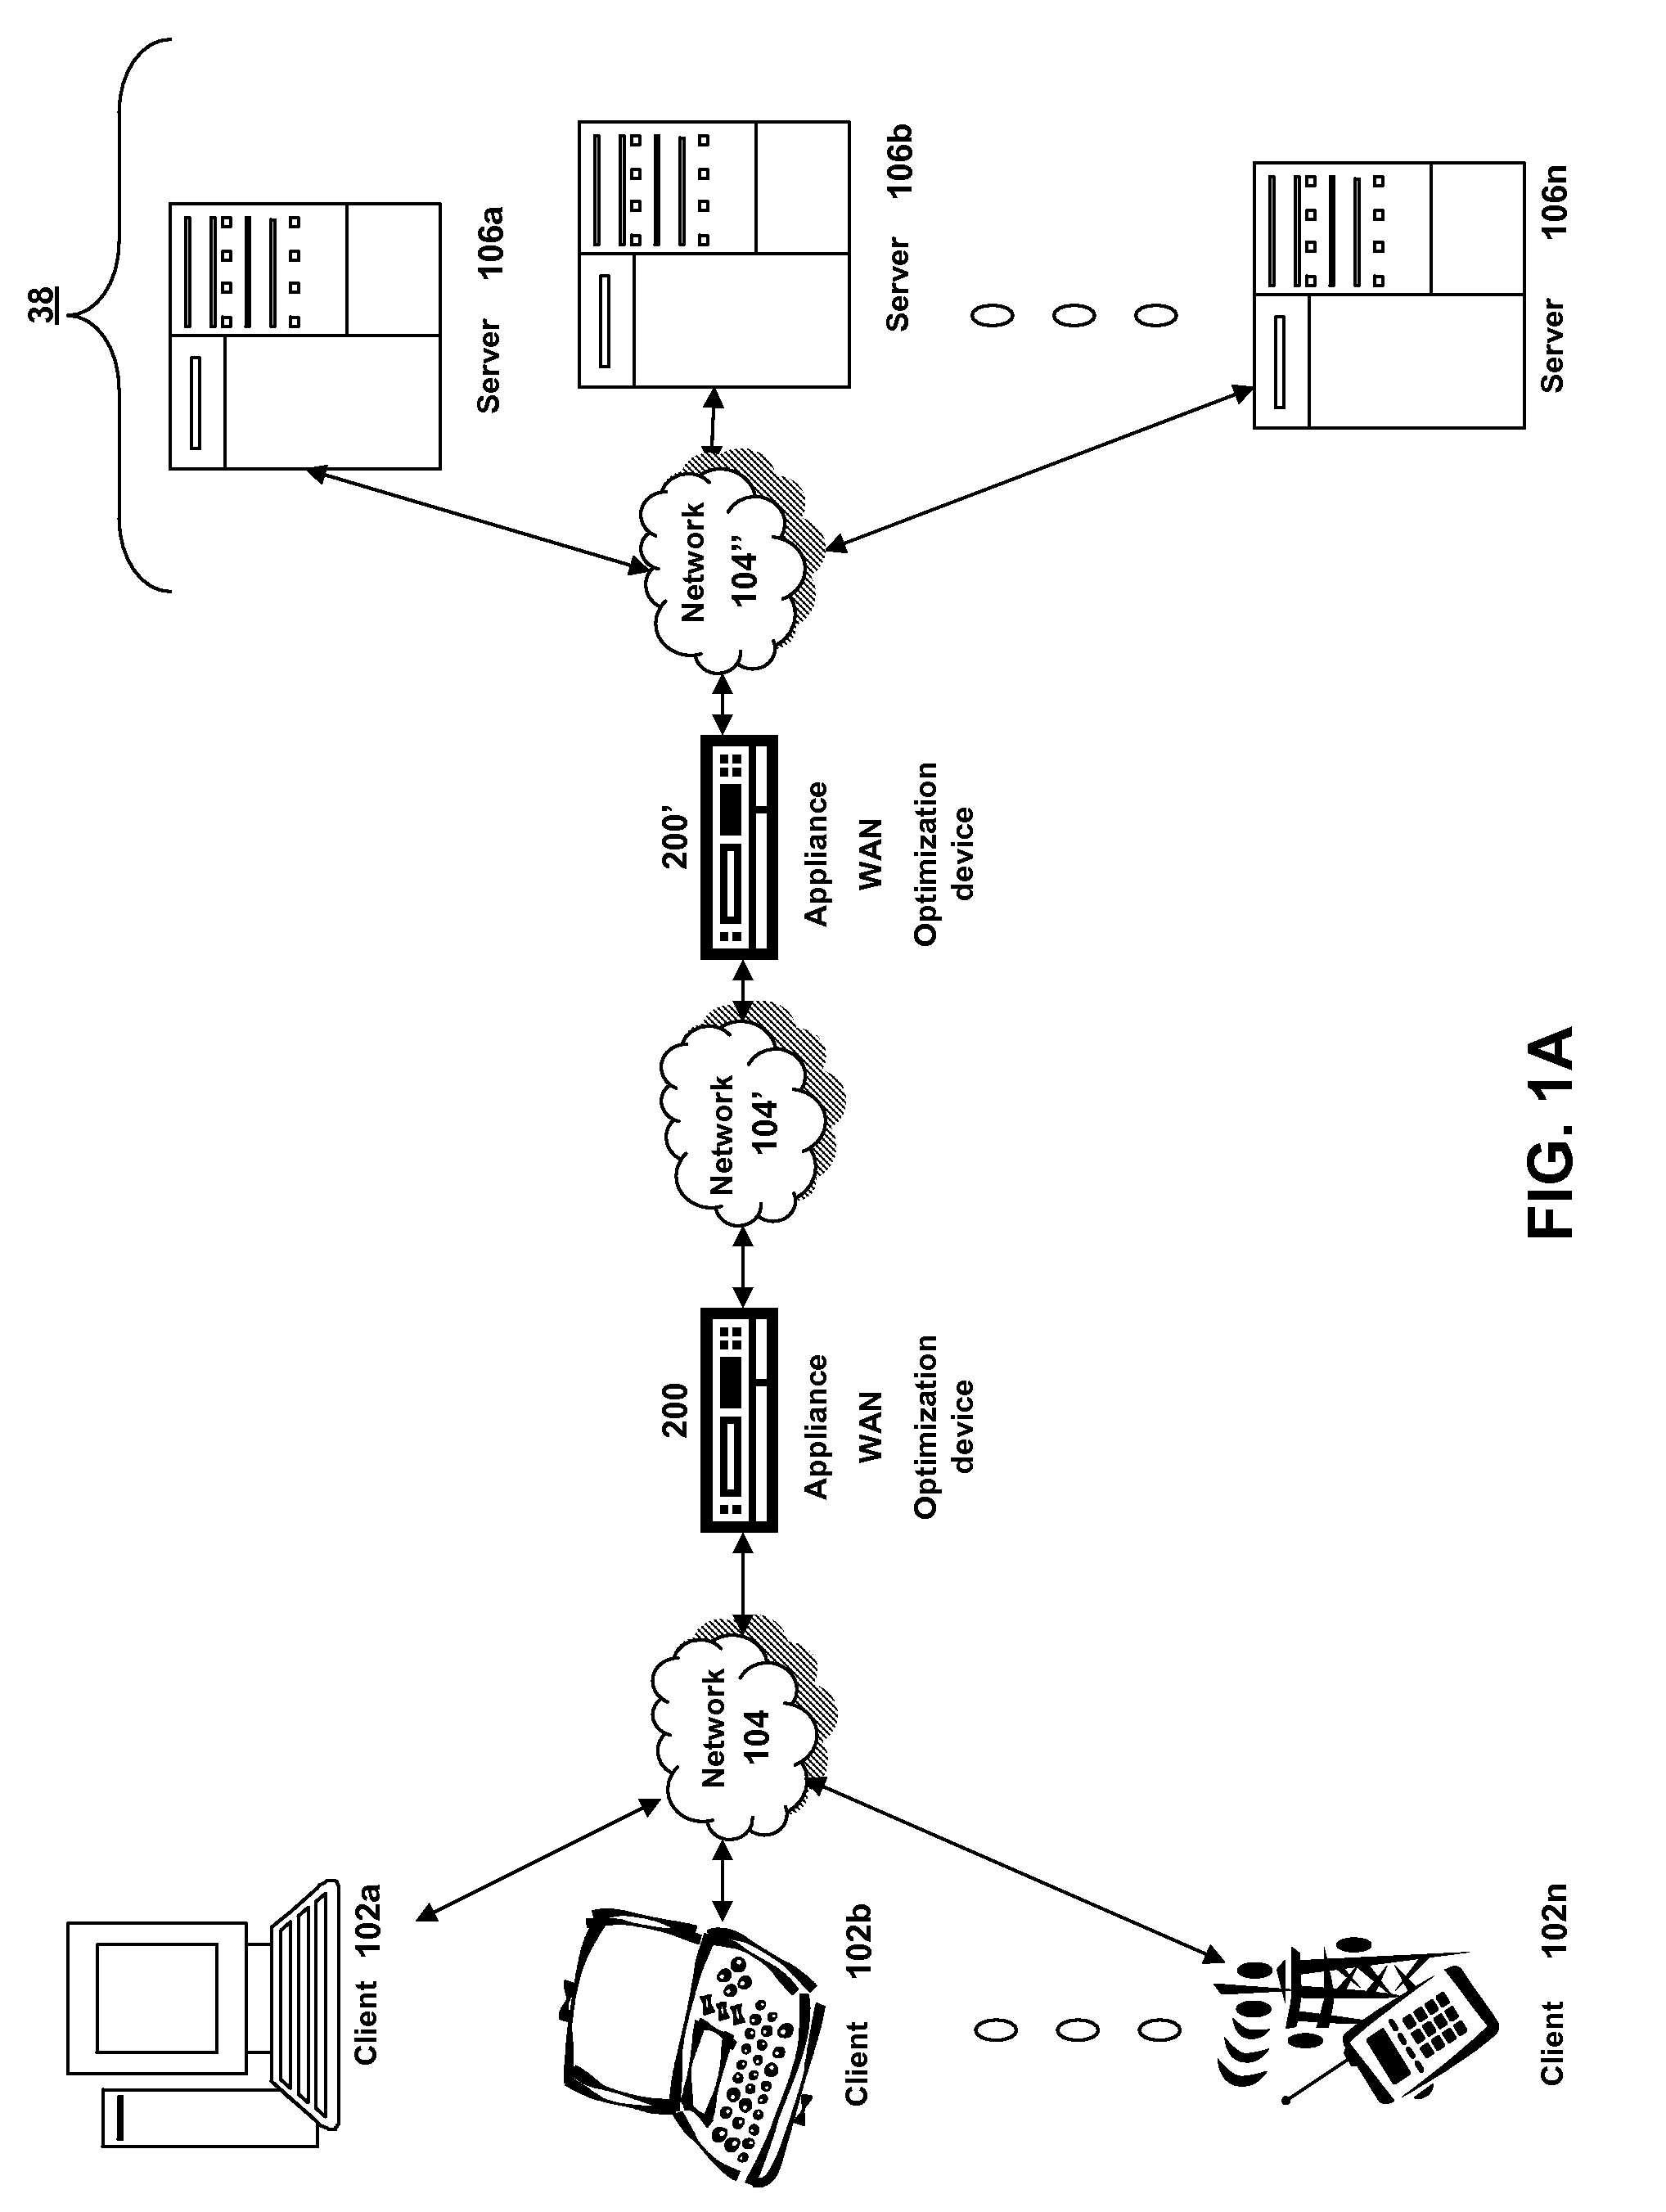 Systems and methods for prefetching objects for caching using QOS